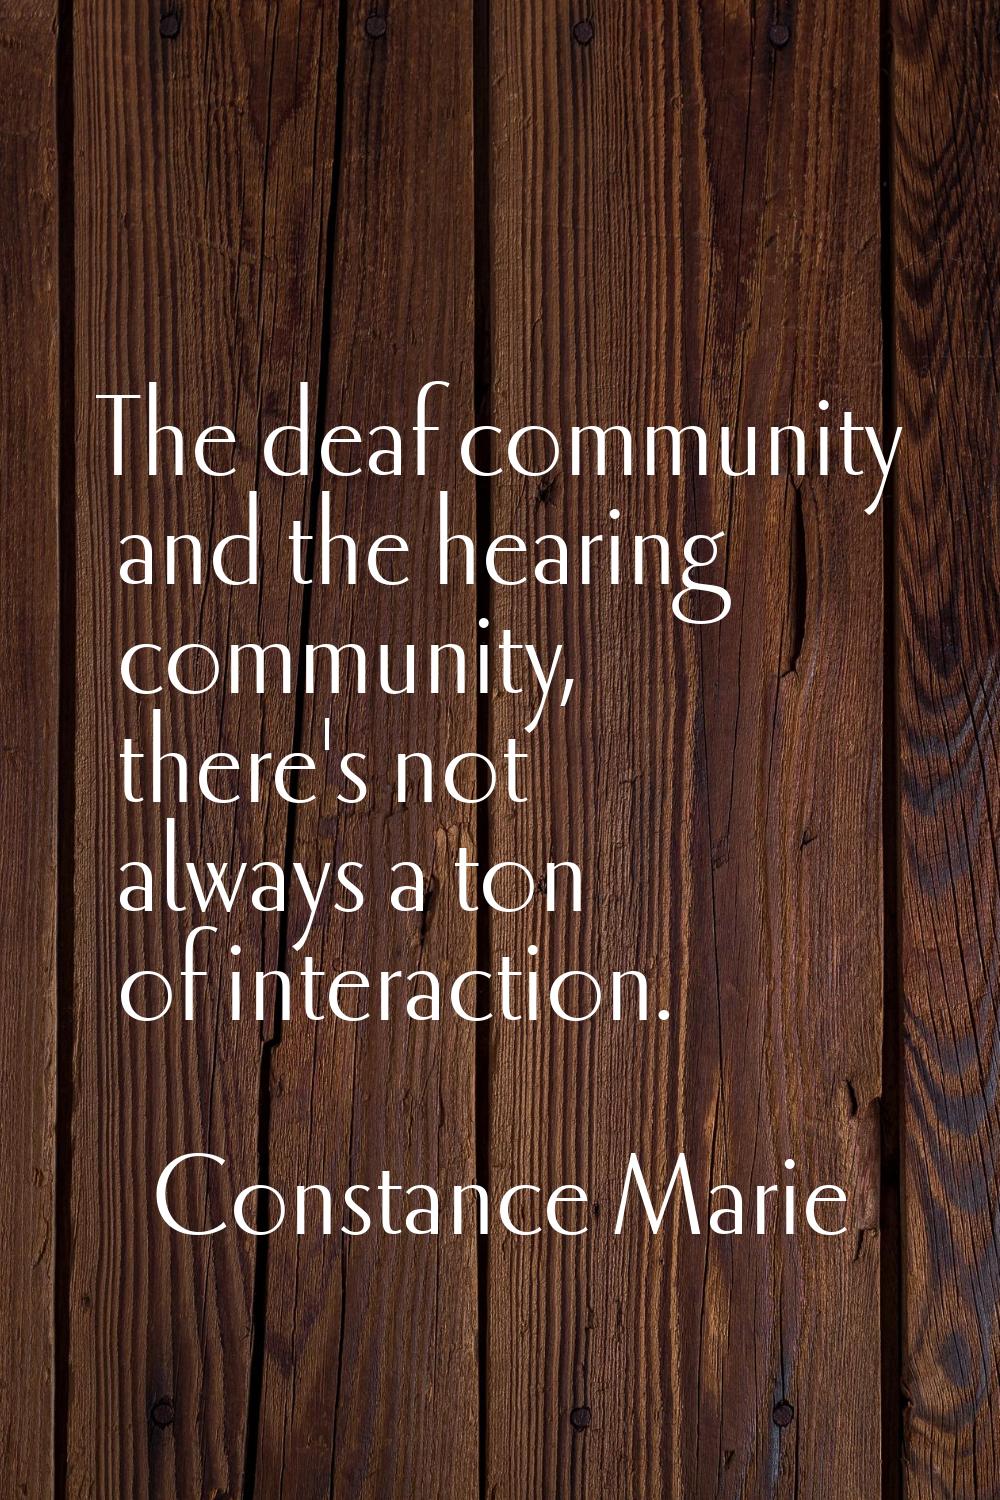 The deaf community and the hearing community, there's not always a ton of interaction.